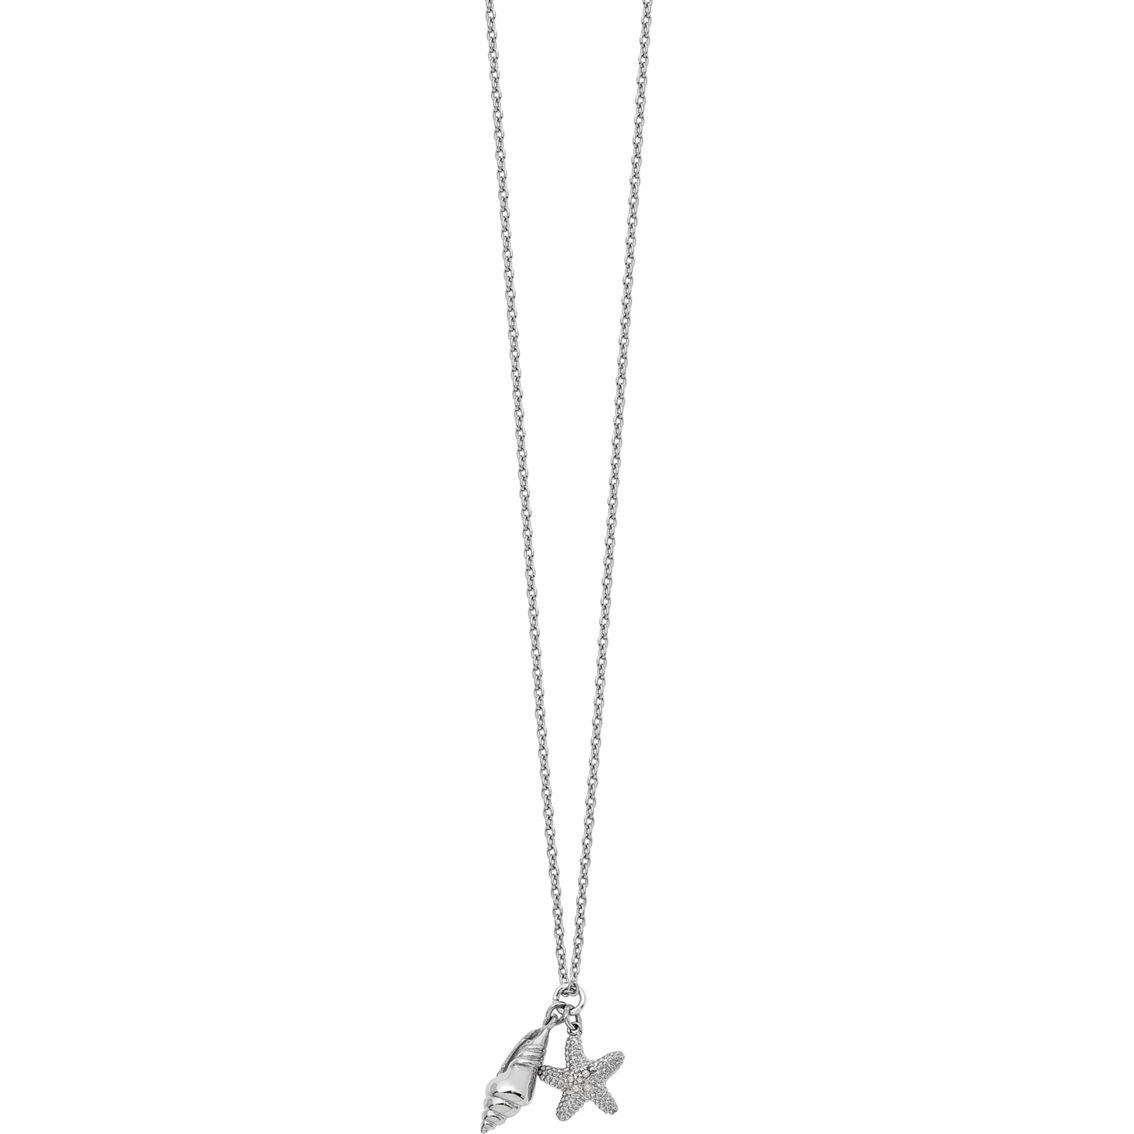 White Ice Sterling Silver Diamond Accent Shell and Starfish Pendant Necklace - Image 2 of 3